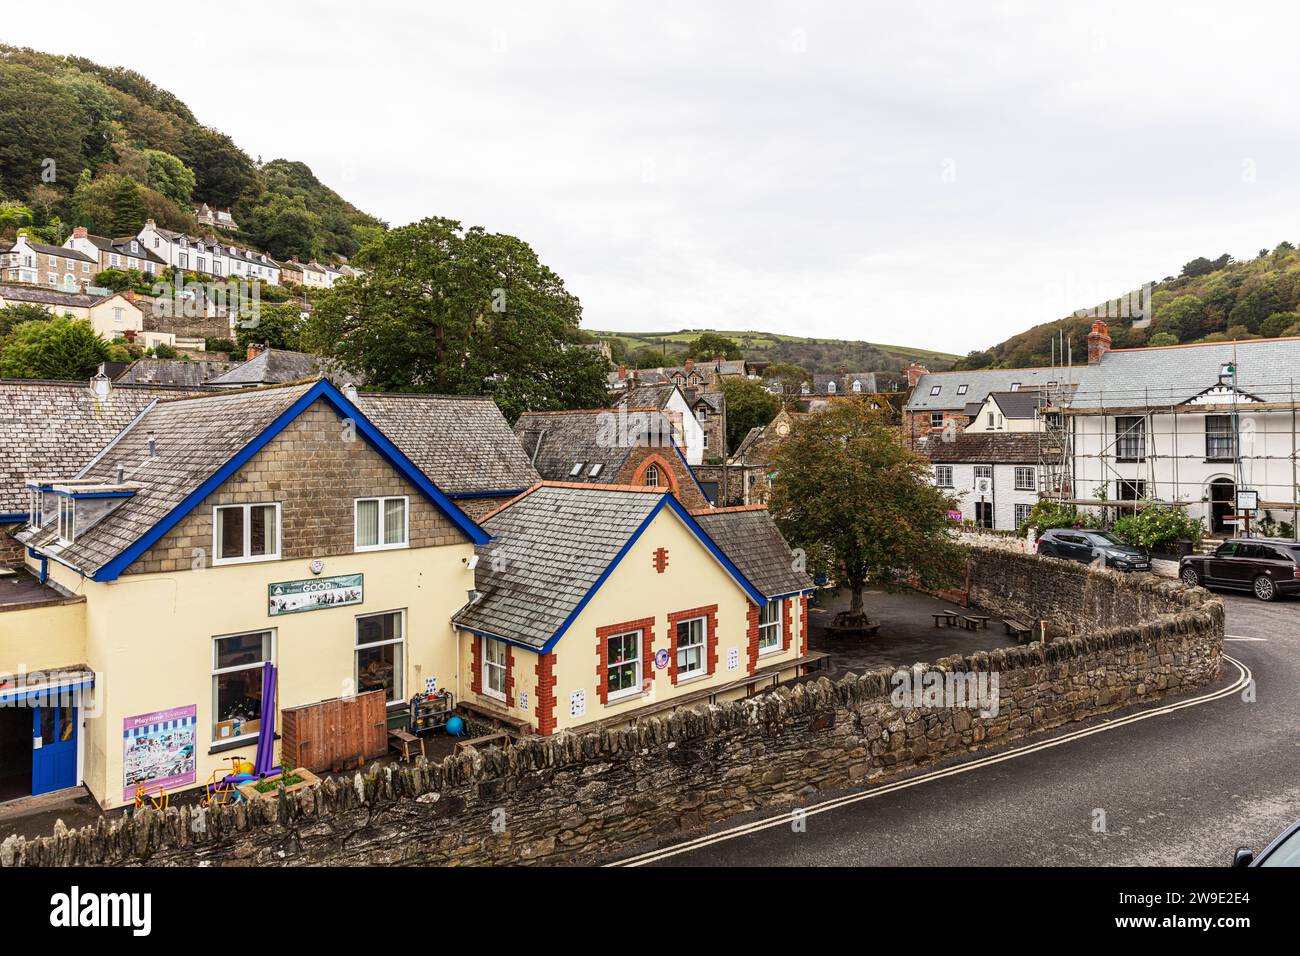 Lynton village centre, Lynton And Lynmouth, Devon, UK, England, Lynton village, Lynton UK, Lynton England, village, villages, houses, shops, Stock Photo